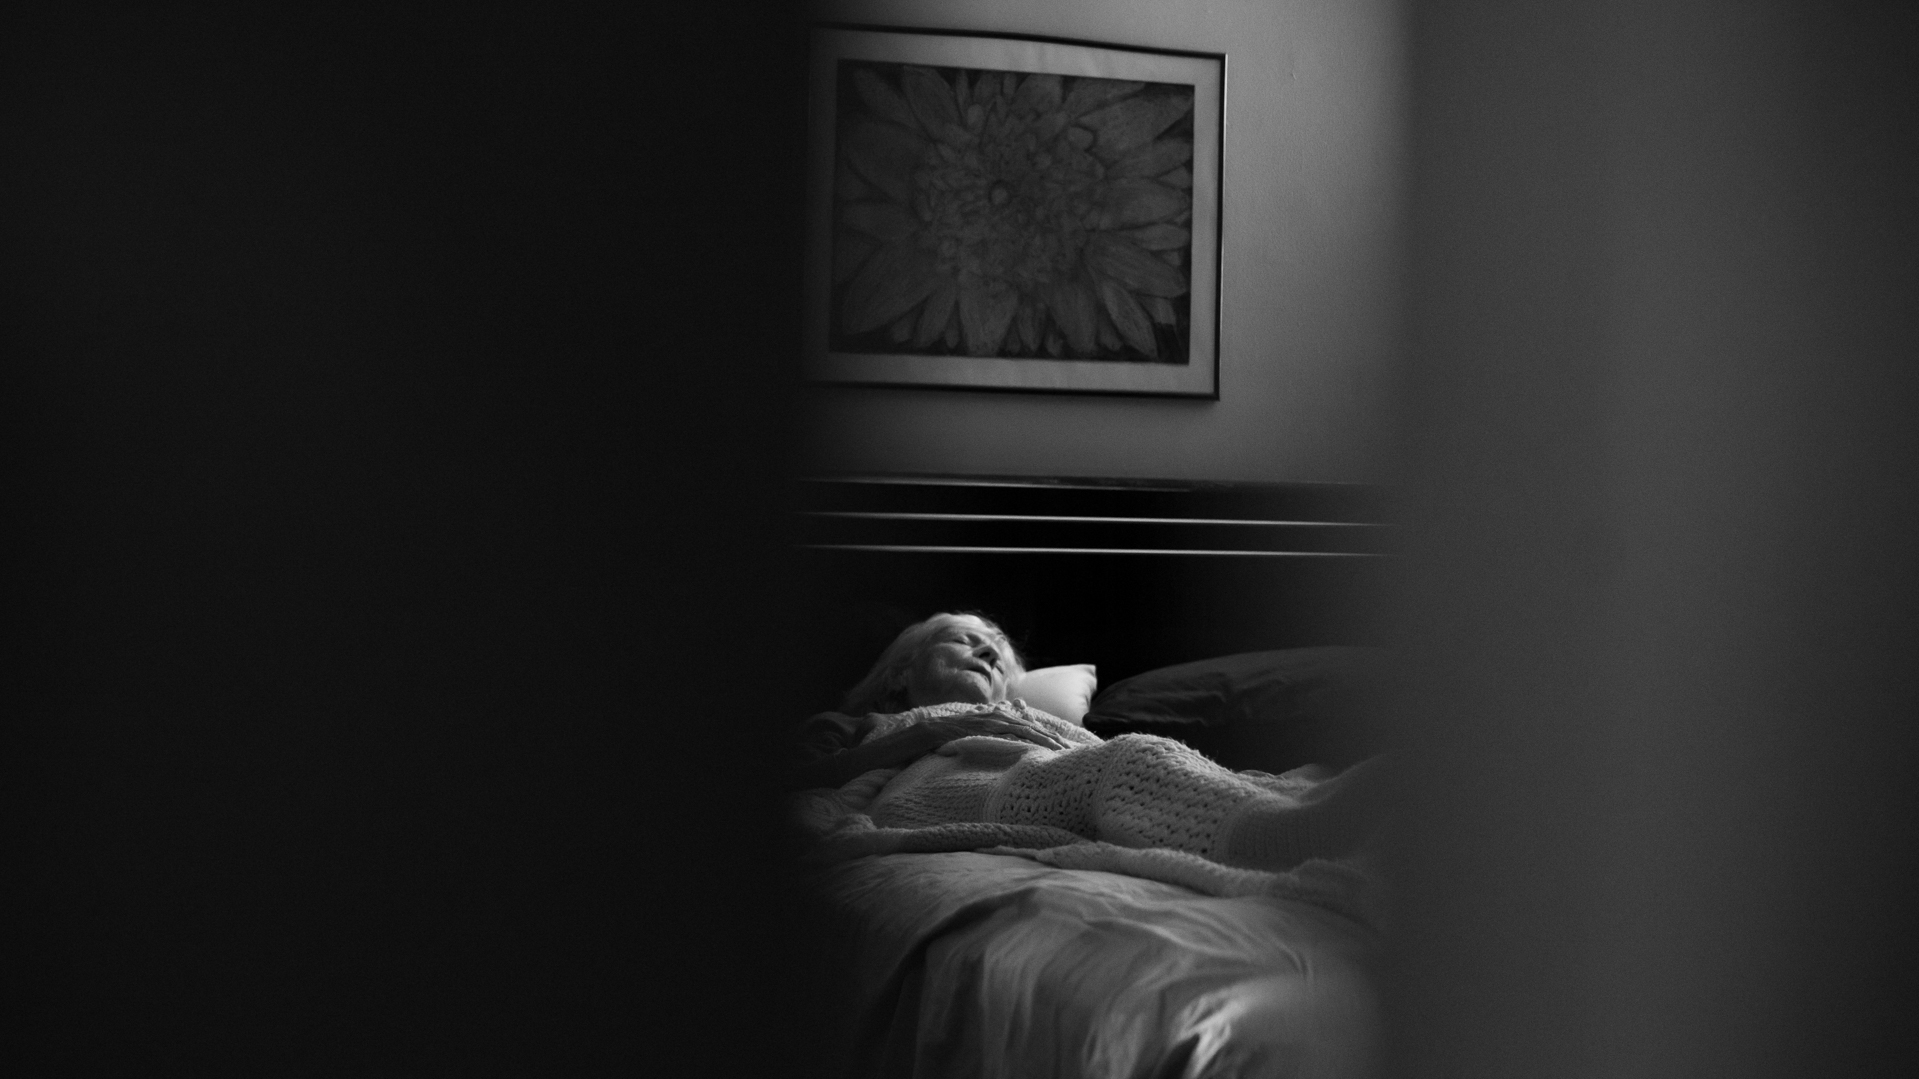 A woman alone in bed